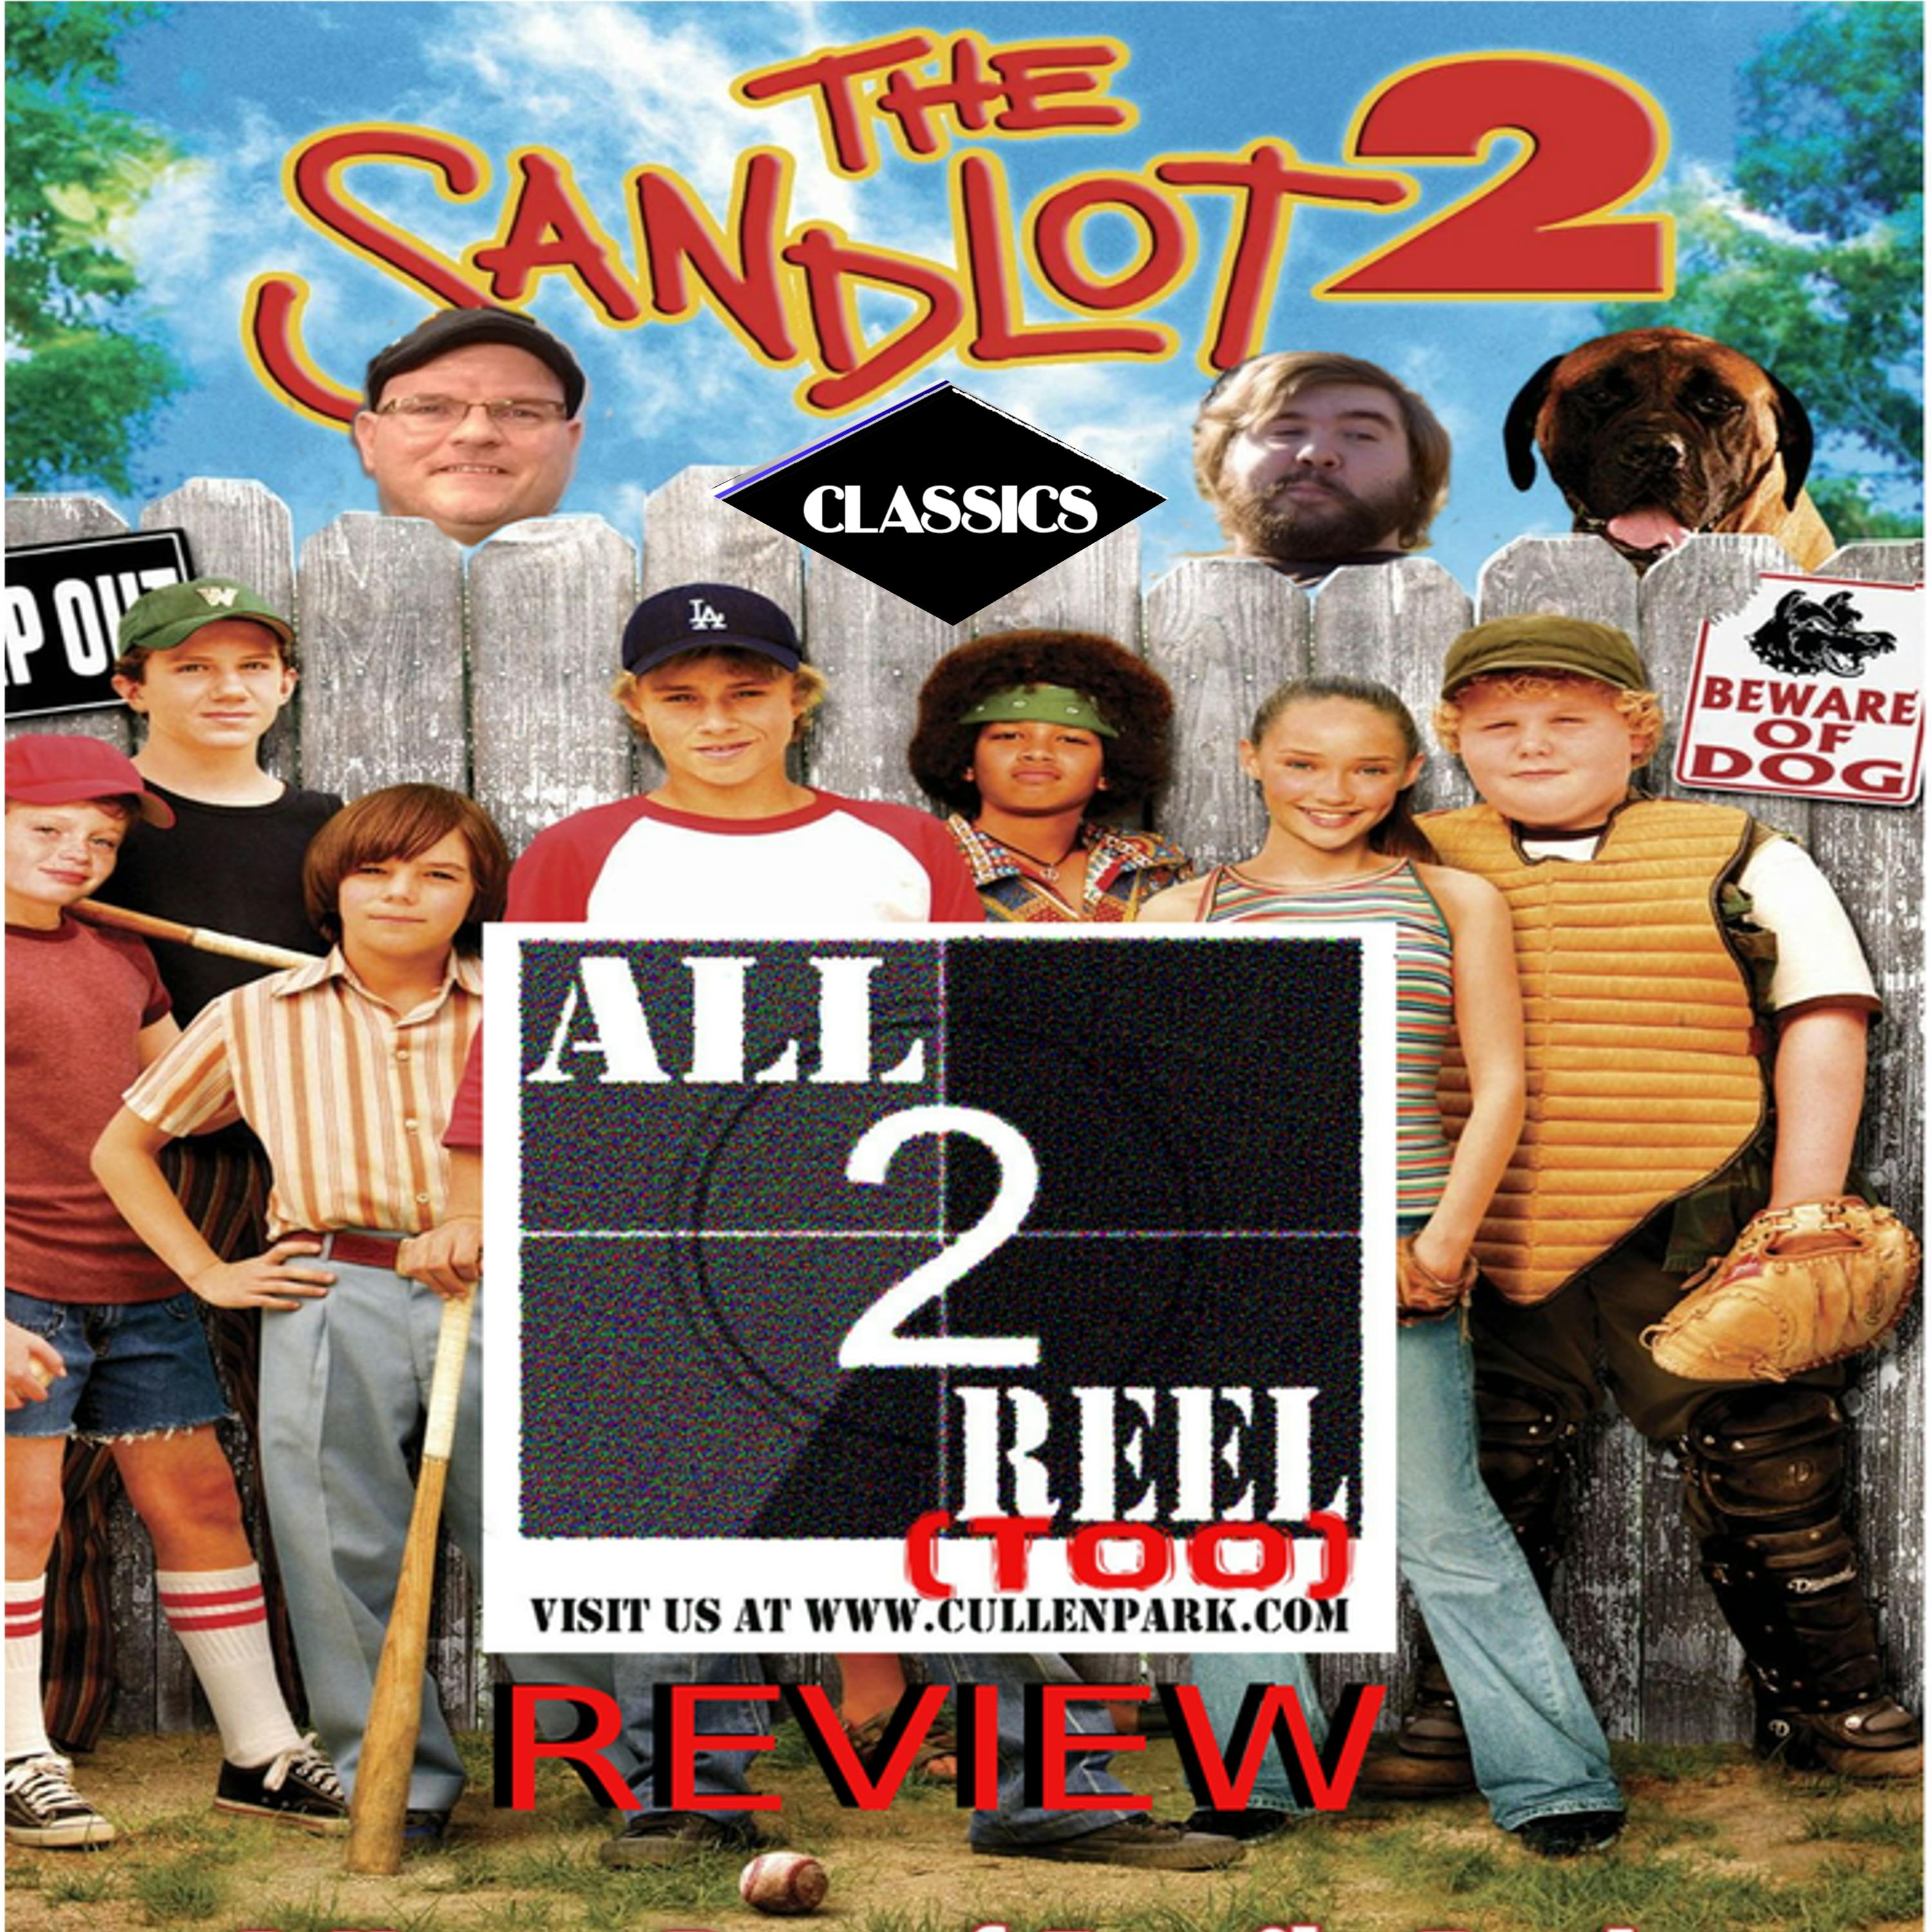 ALL2REELTOO CLASSICS - The Sandlot 2 (2005) - Direct from Hell